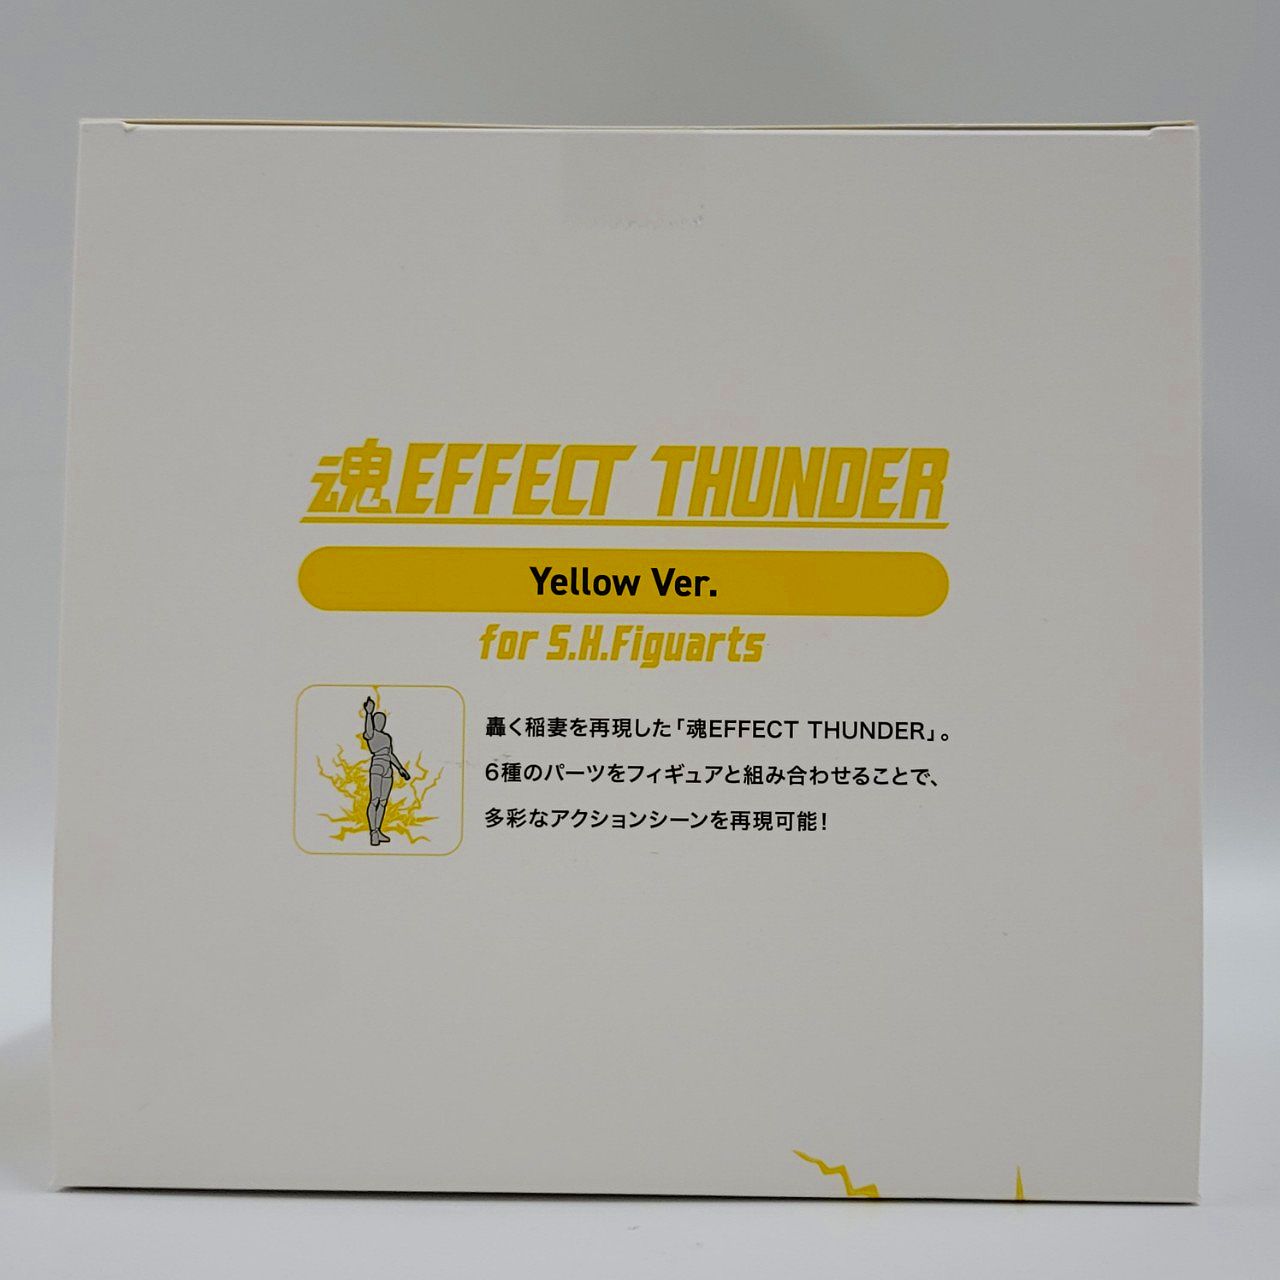 S.H.FiguartsEFFECT THUNDER Yellow Ver. for S.H.Figuarts